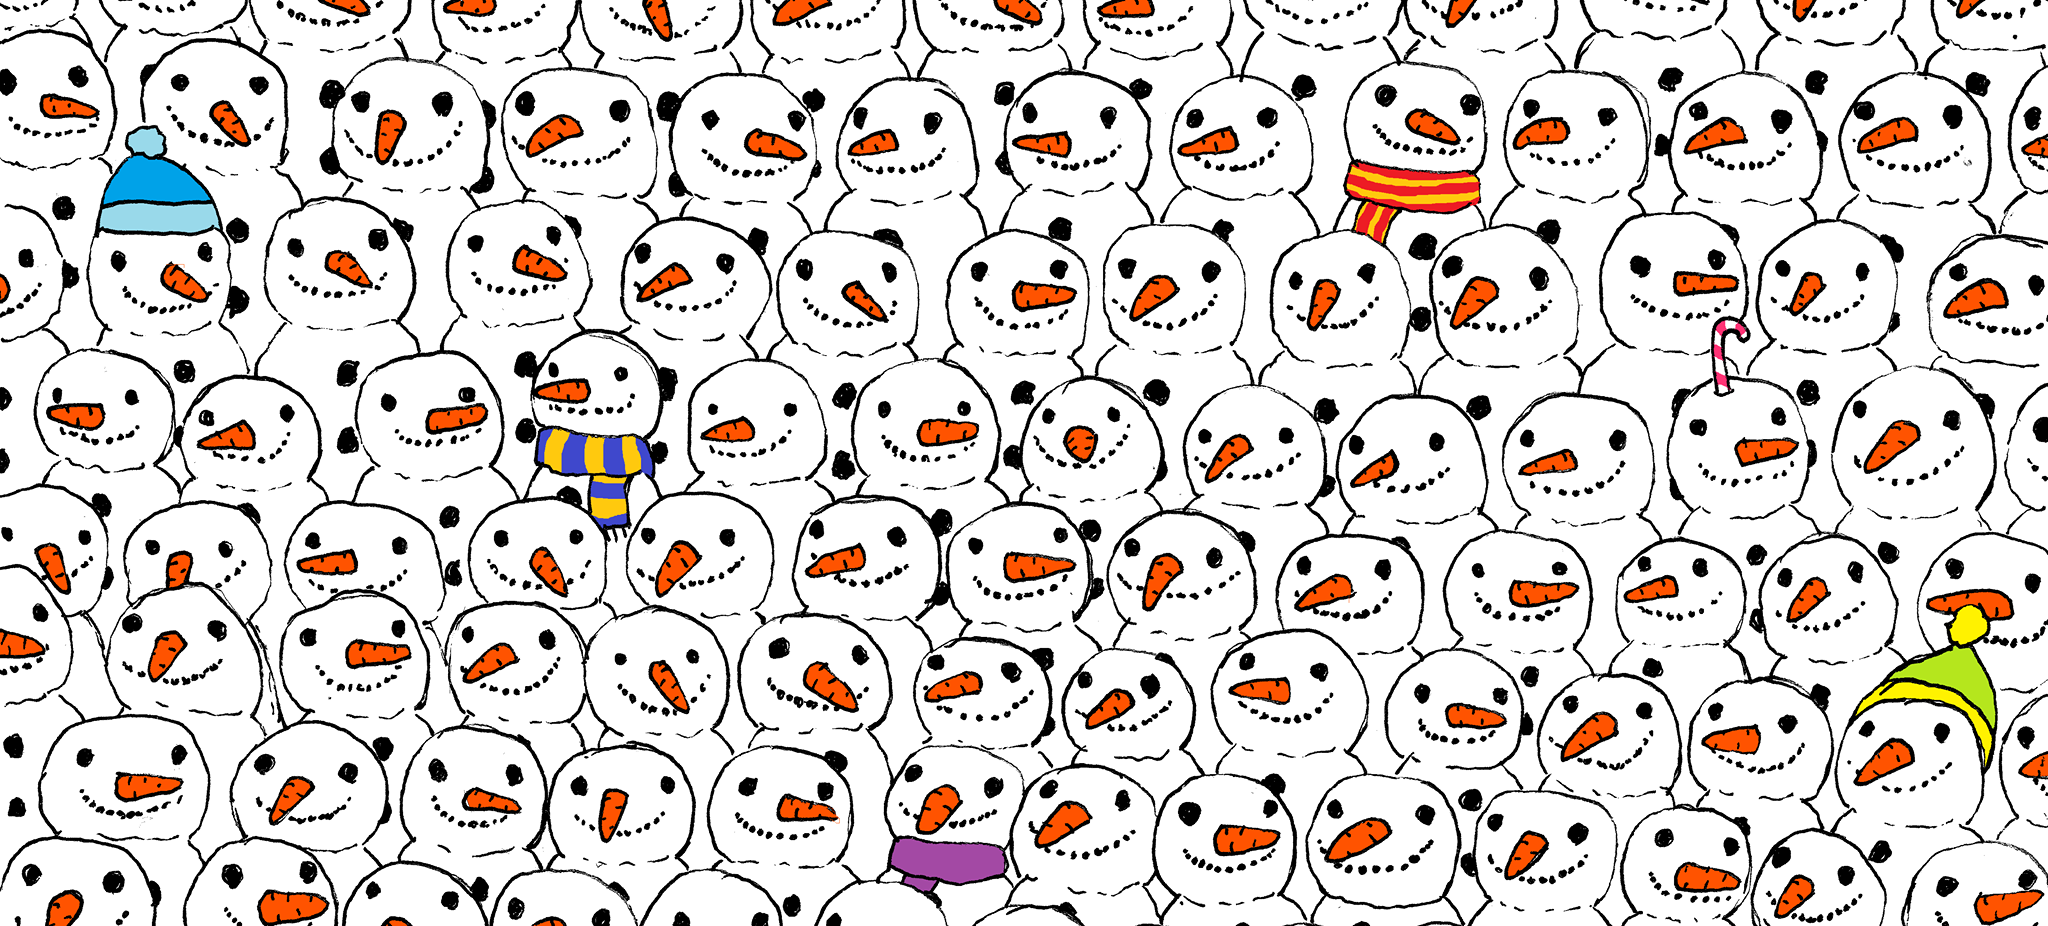 Find the panda among the snowmen puzzle